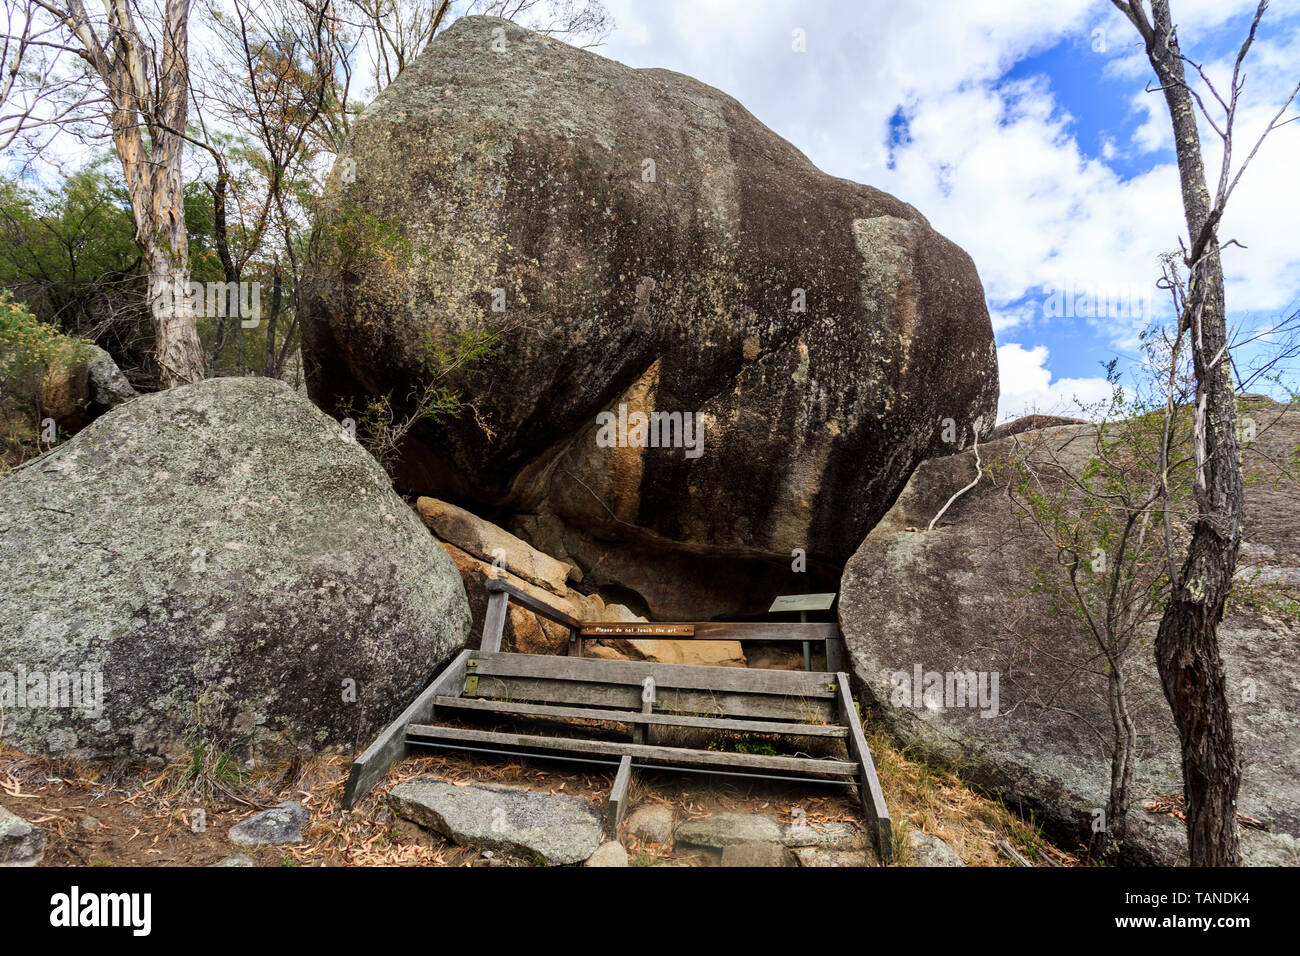 Weathered tors, or granite boulders, creating the little cave where the Anaiwan Aboriginal people painted their rock art some hundred years ago, near  Stock Photo